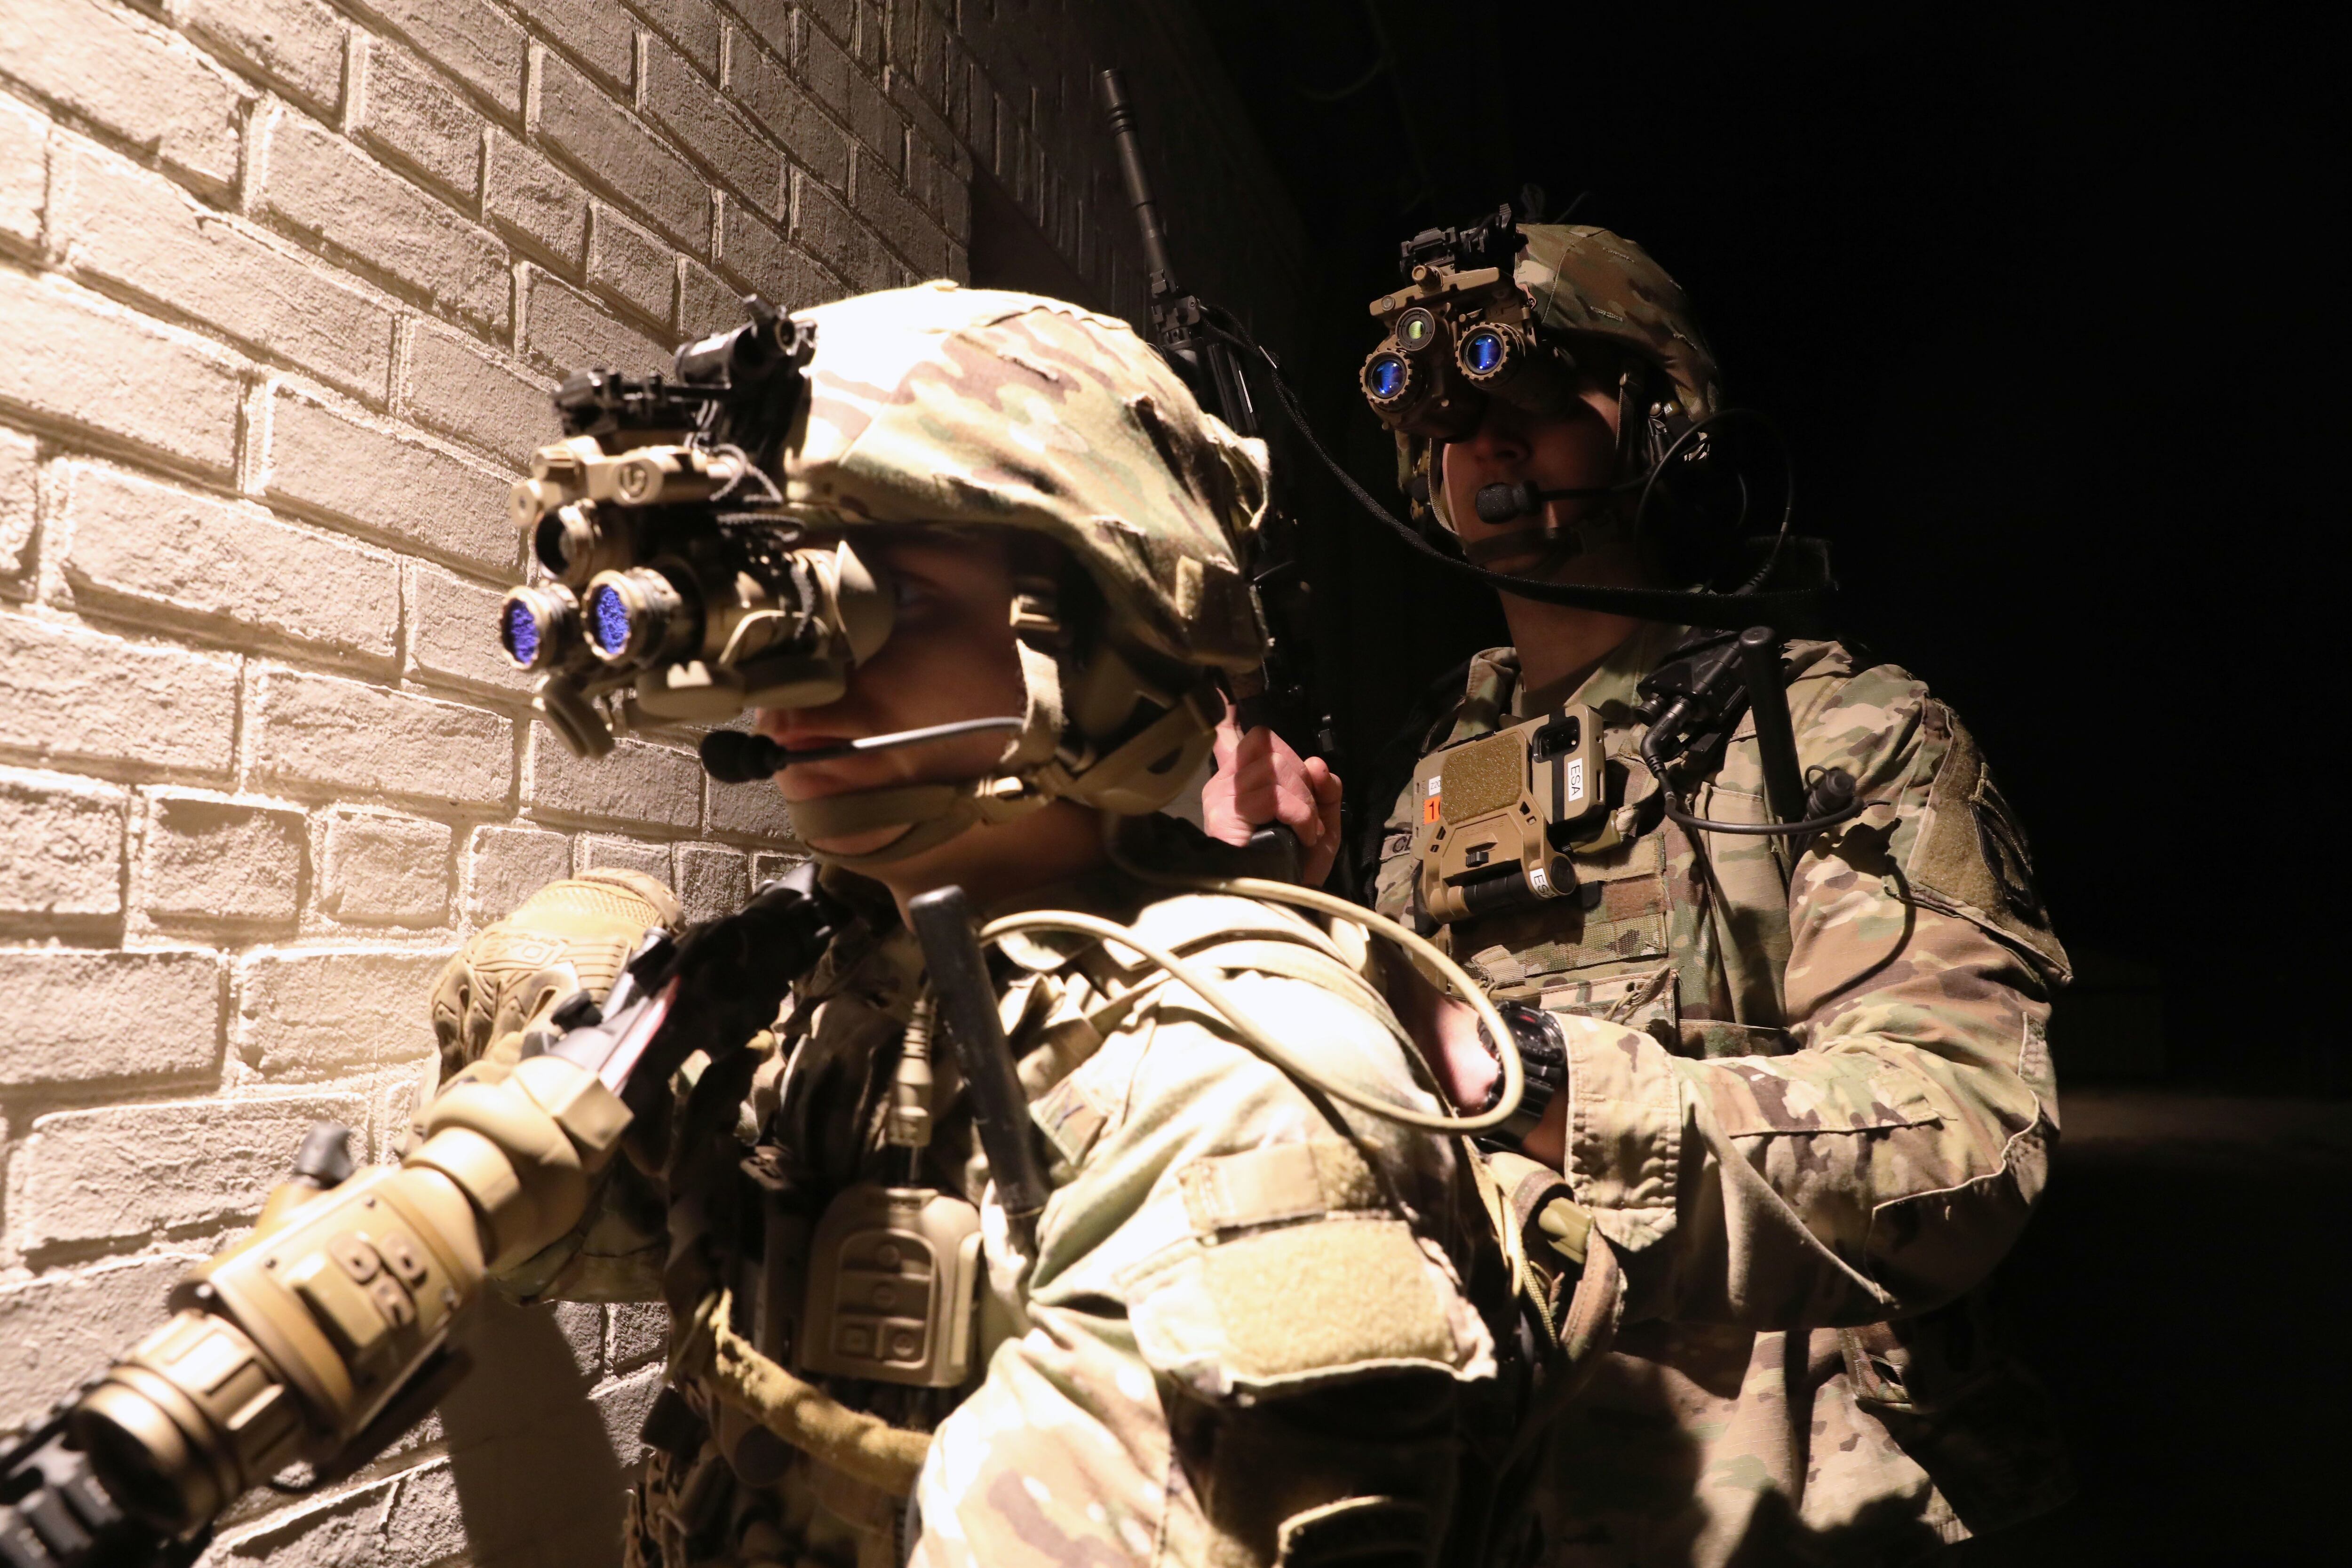 New DARPA research could make night vision goggles smaller